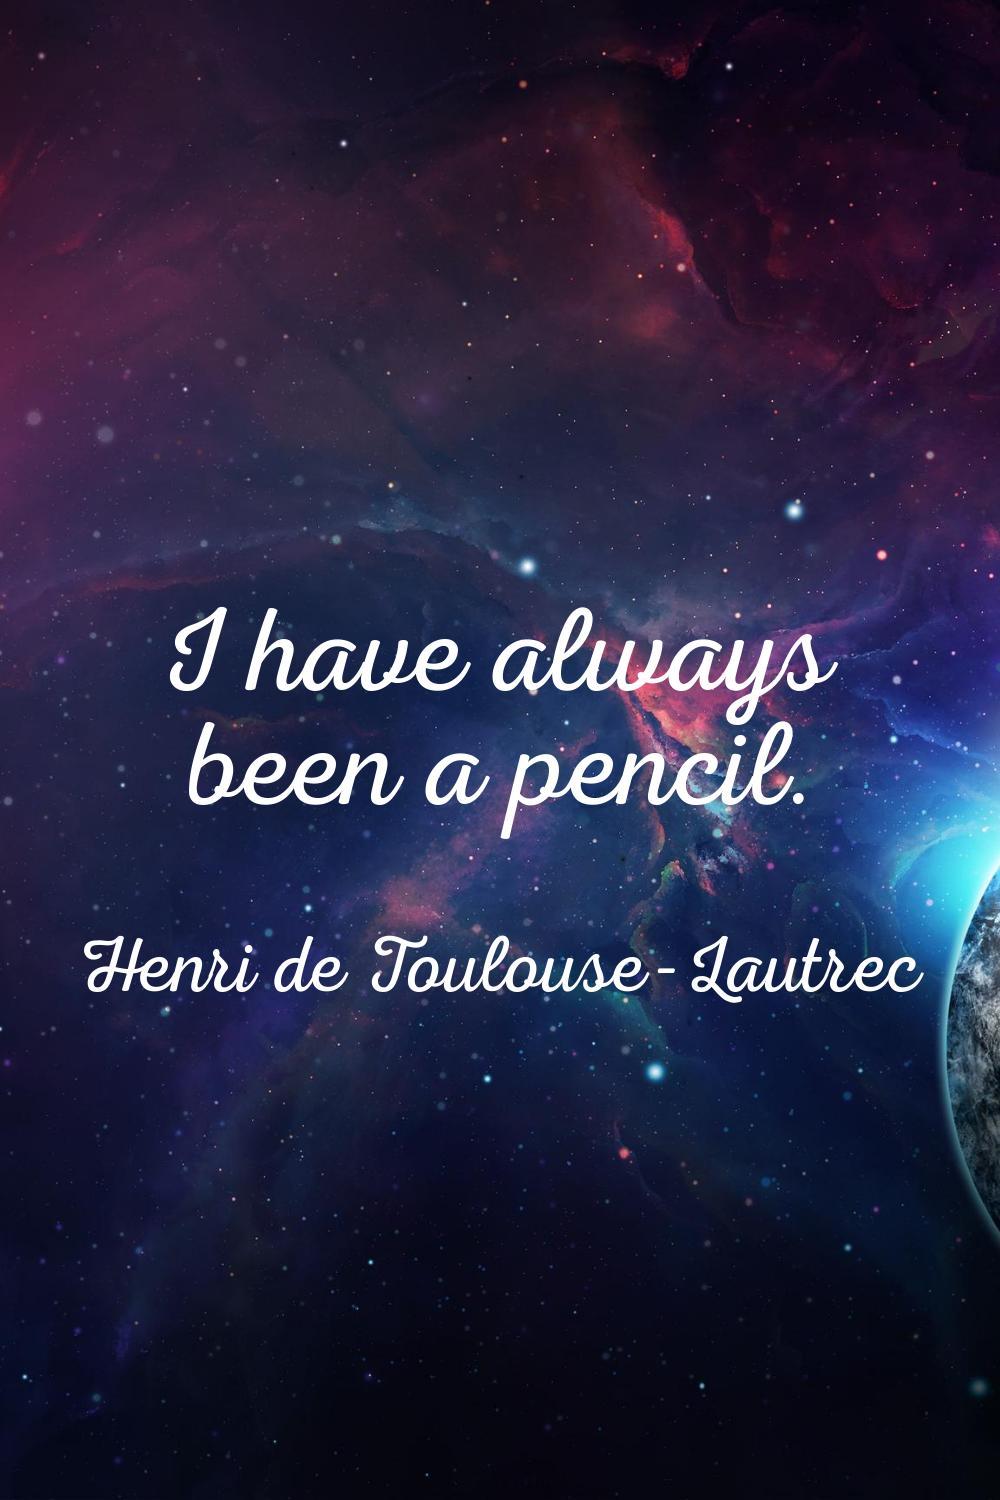 I have always been a pencil.